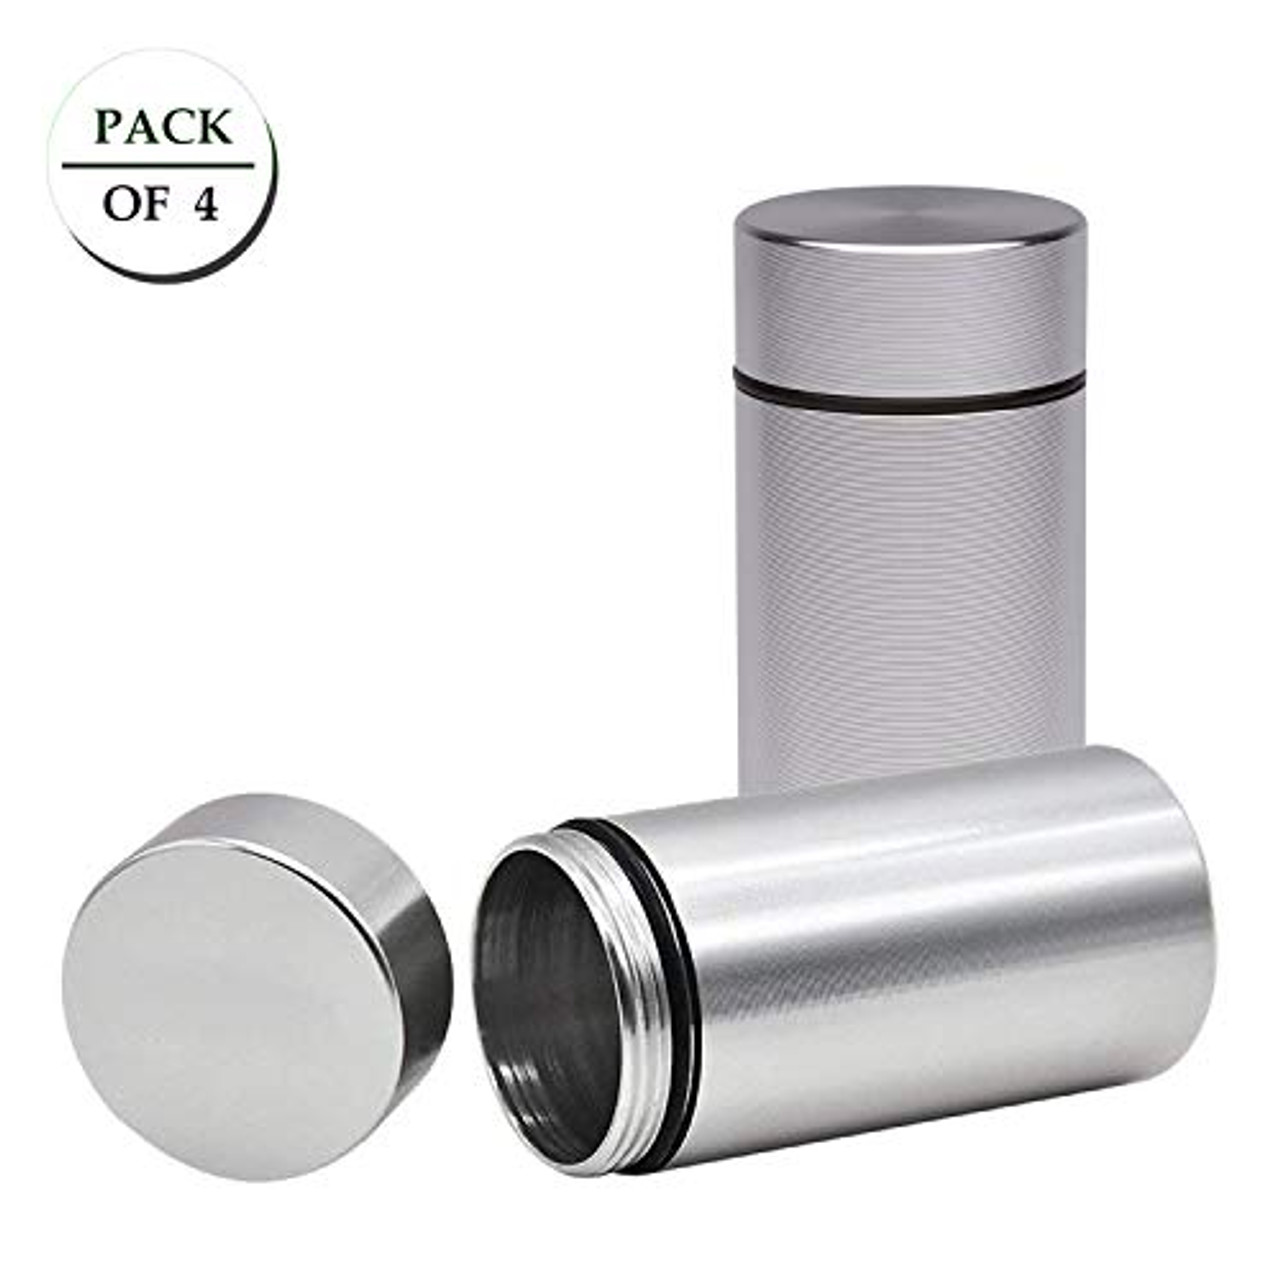 Stash Jar Airtight Smell Proof Jar Aluminum Storage Container. Waterproof  Weed Accessories Durable Multi-Use Portable